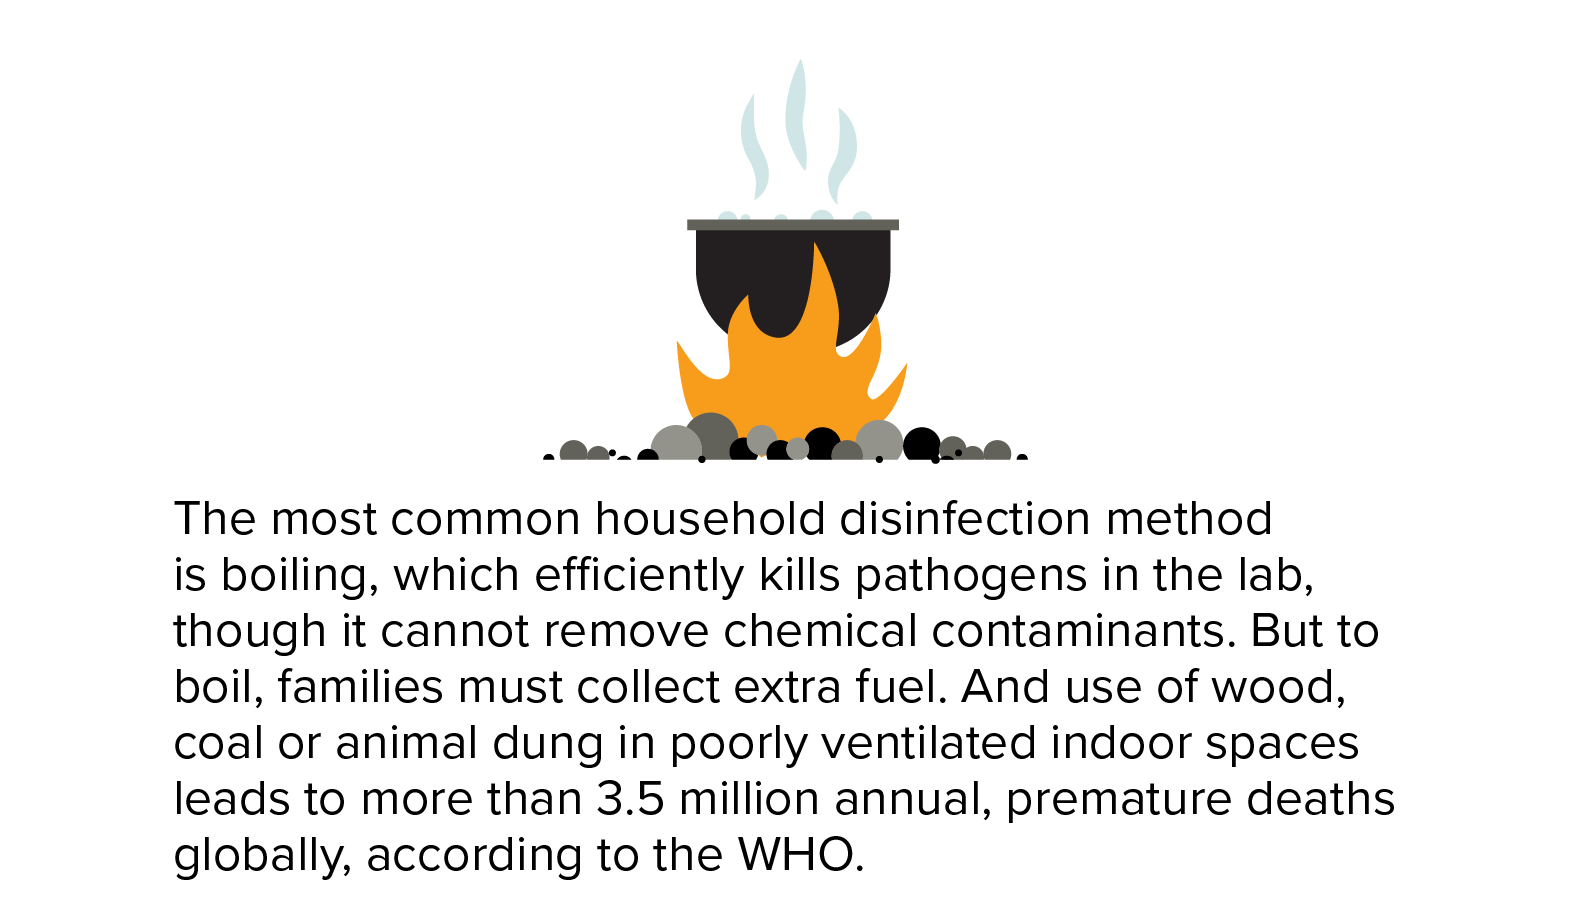 The most common household disinfection method is boiling, which efficiently kills pathogens in the lab. But to boil, families must collect extra fuel. And use of wood, coal or animal dung in poorly ventilated indoor spaces leads to more than 3.5 million annual, premature deaths globally, according to the WHO.